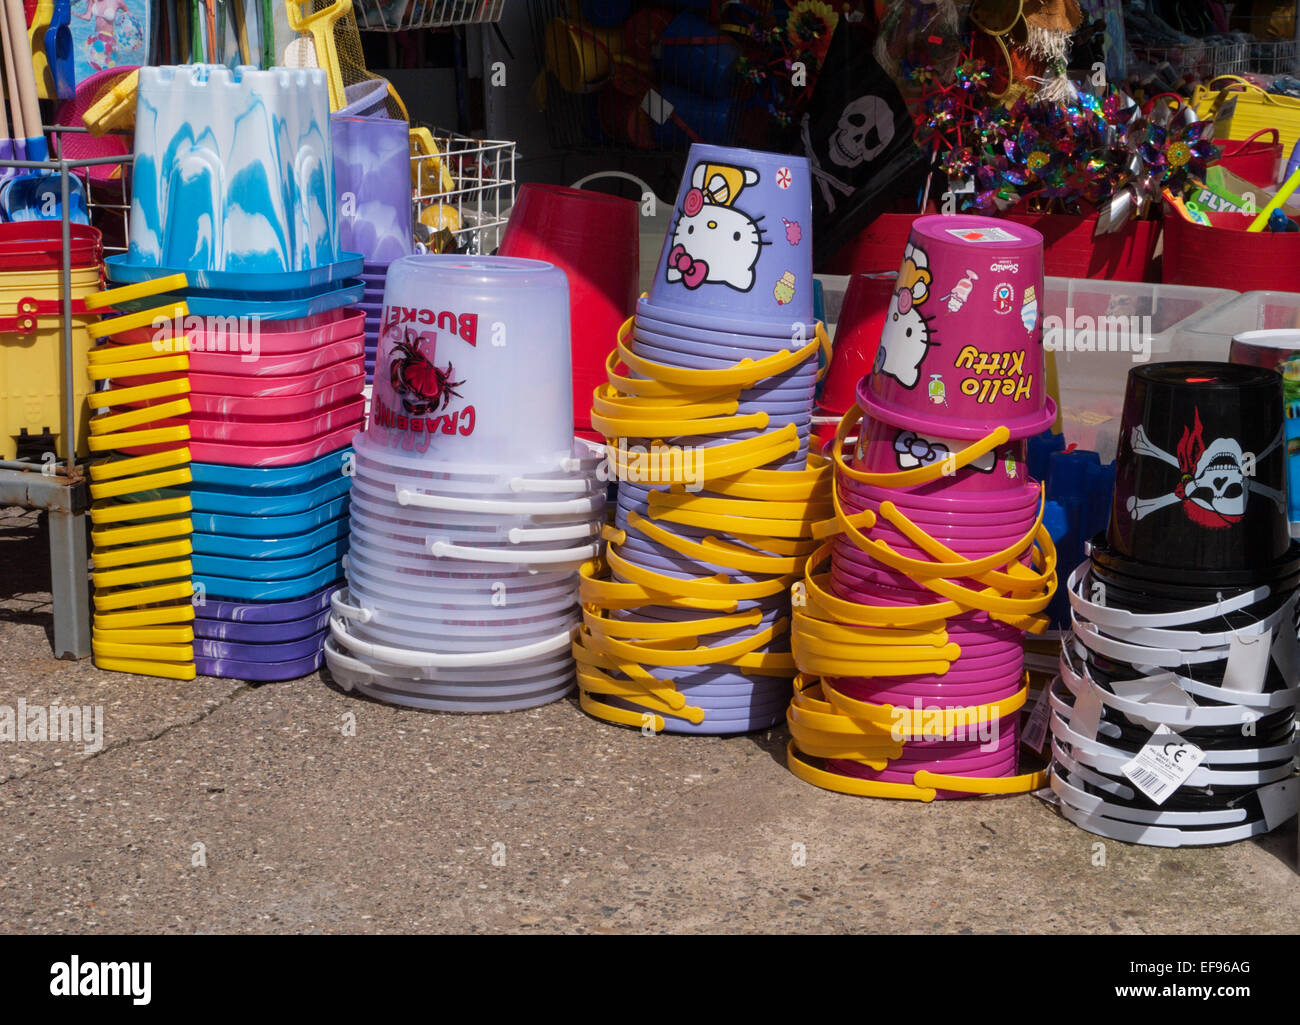 Seaside toy buckets in a shop near the beach in Filey, Yorkshire. Stock Photo